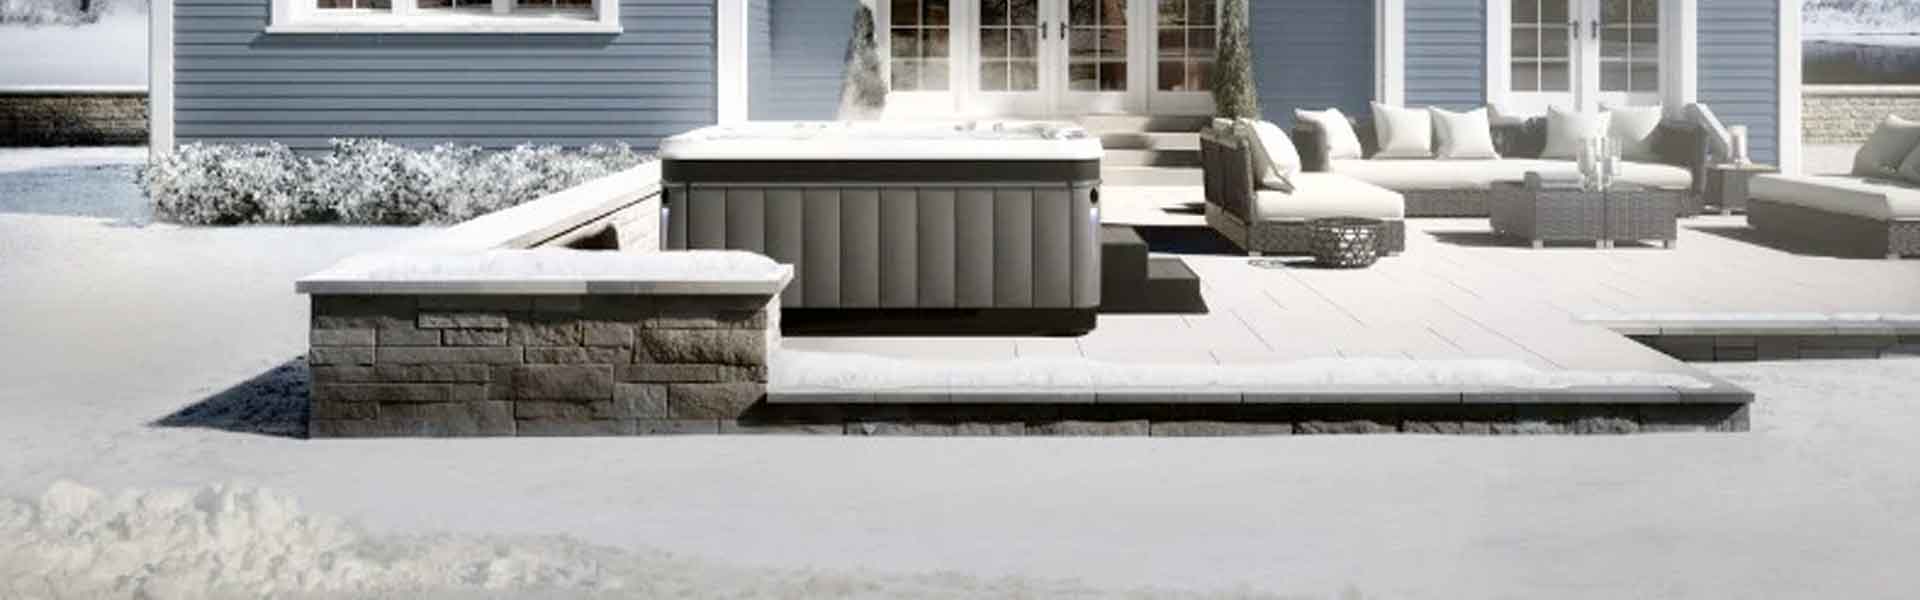 Your Hot Tub for Winter Stress Relief